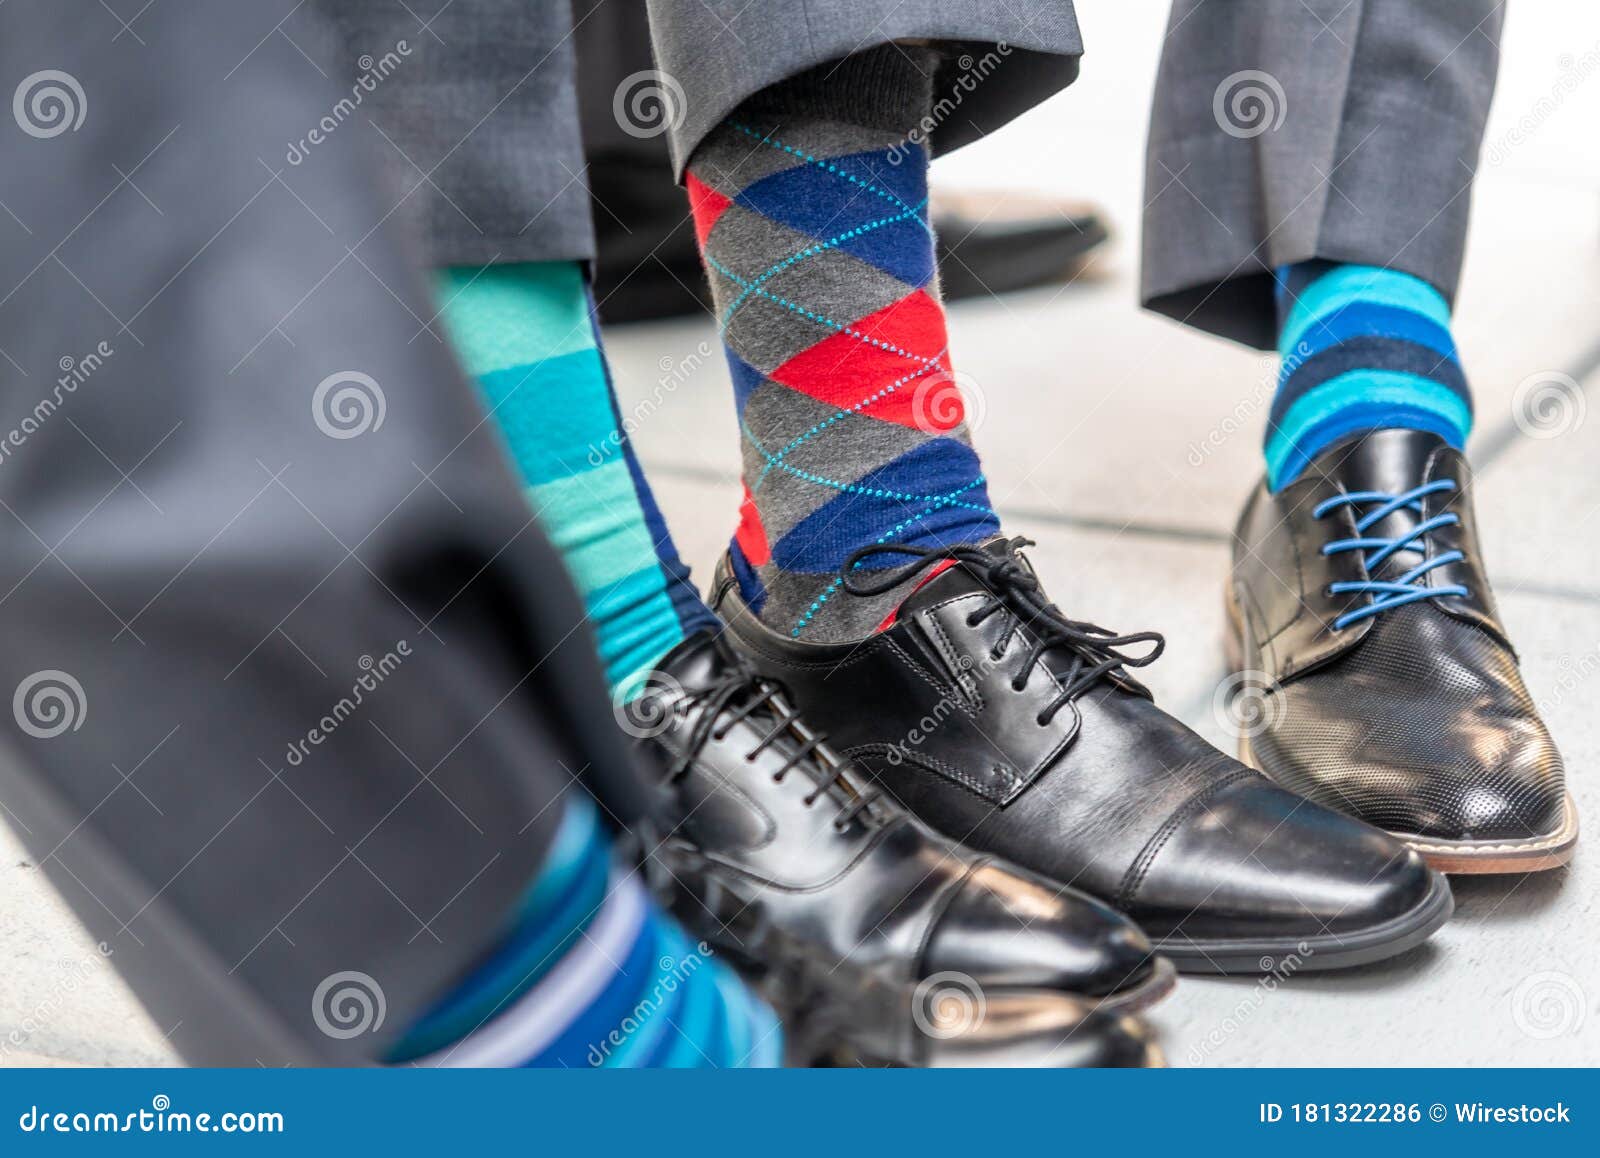 Closeup Shot of Men Wearing Patterned Colorful Socks with Suits and ...